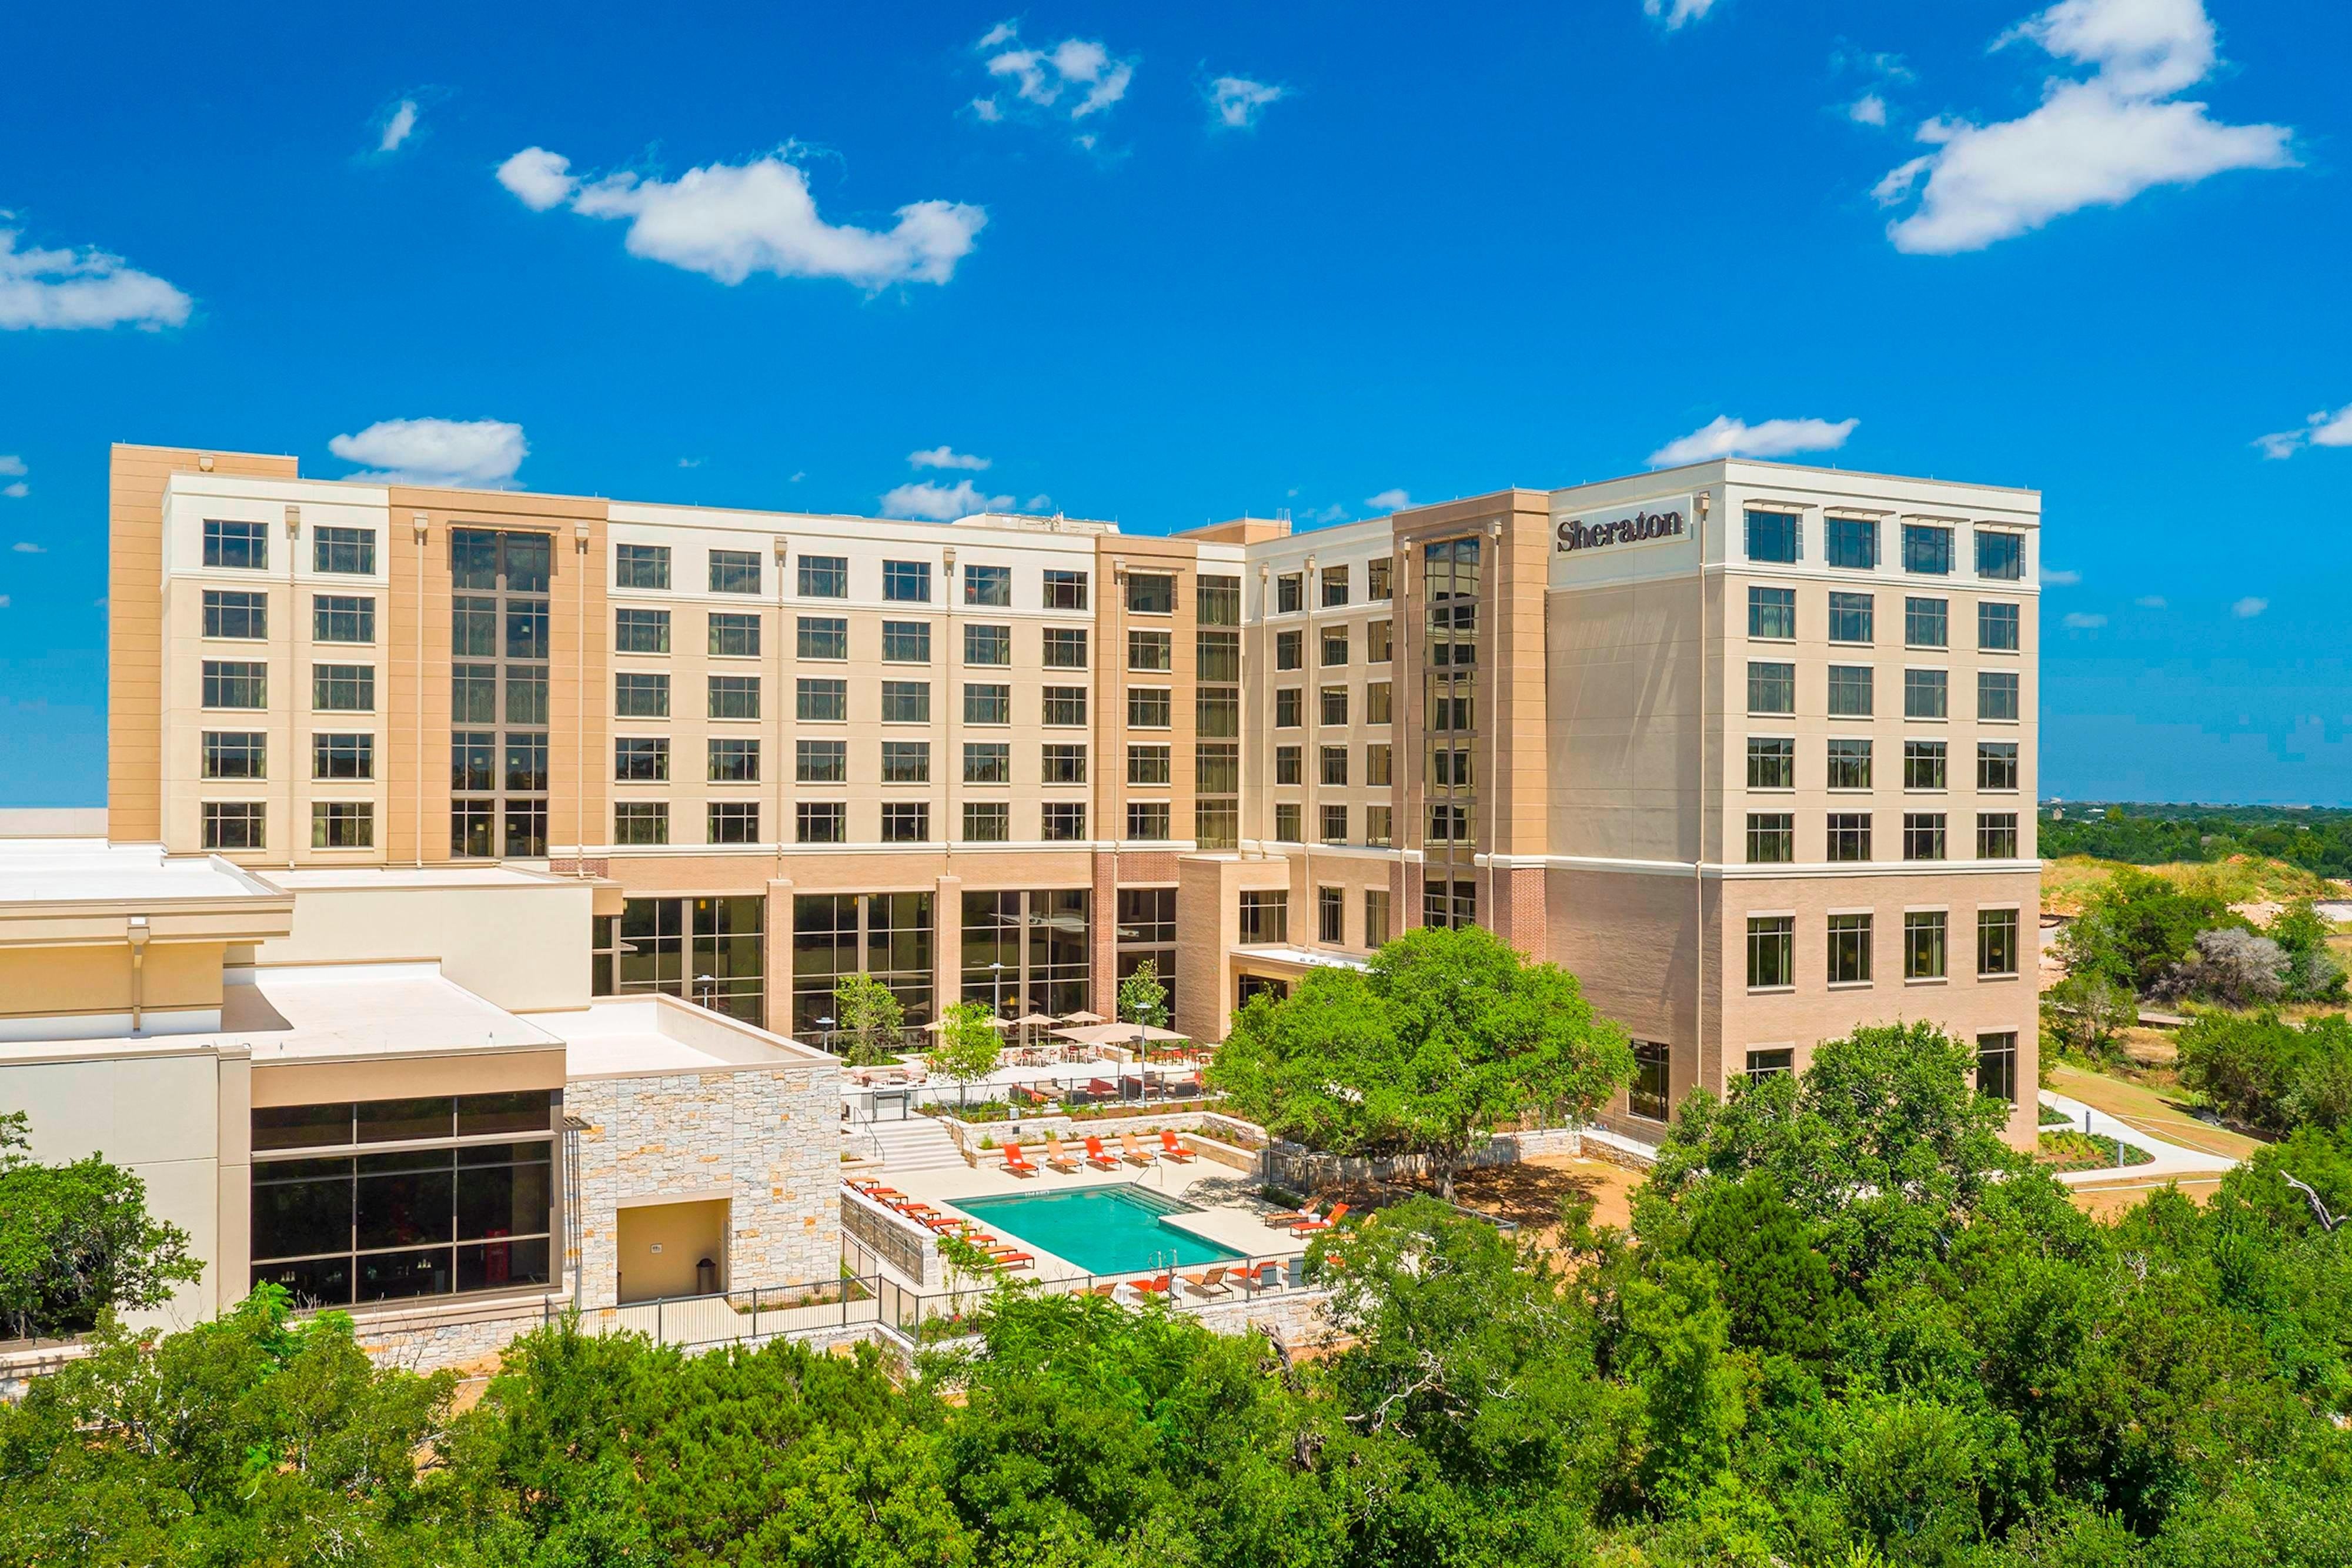 Sheraton Austin Georgetown Hotel & Conference Center image